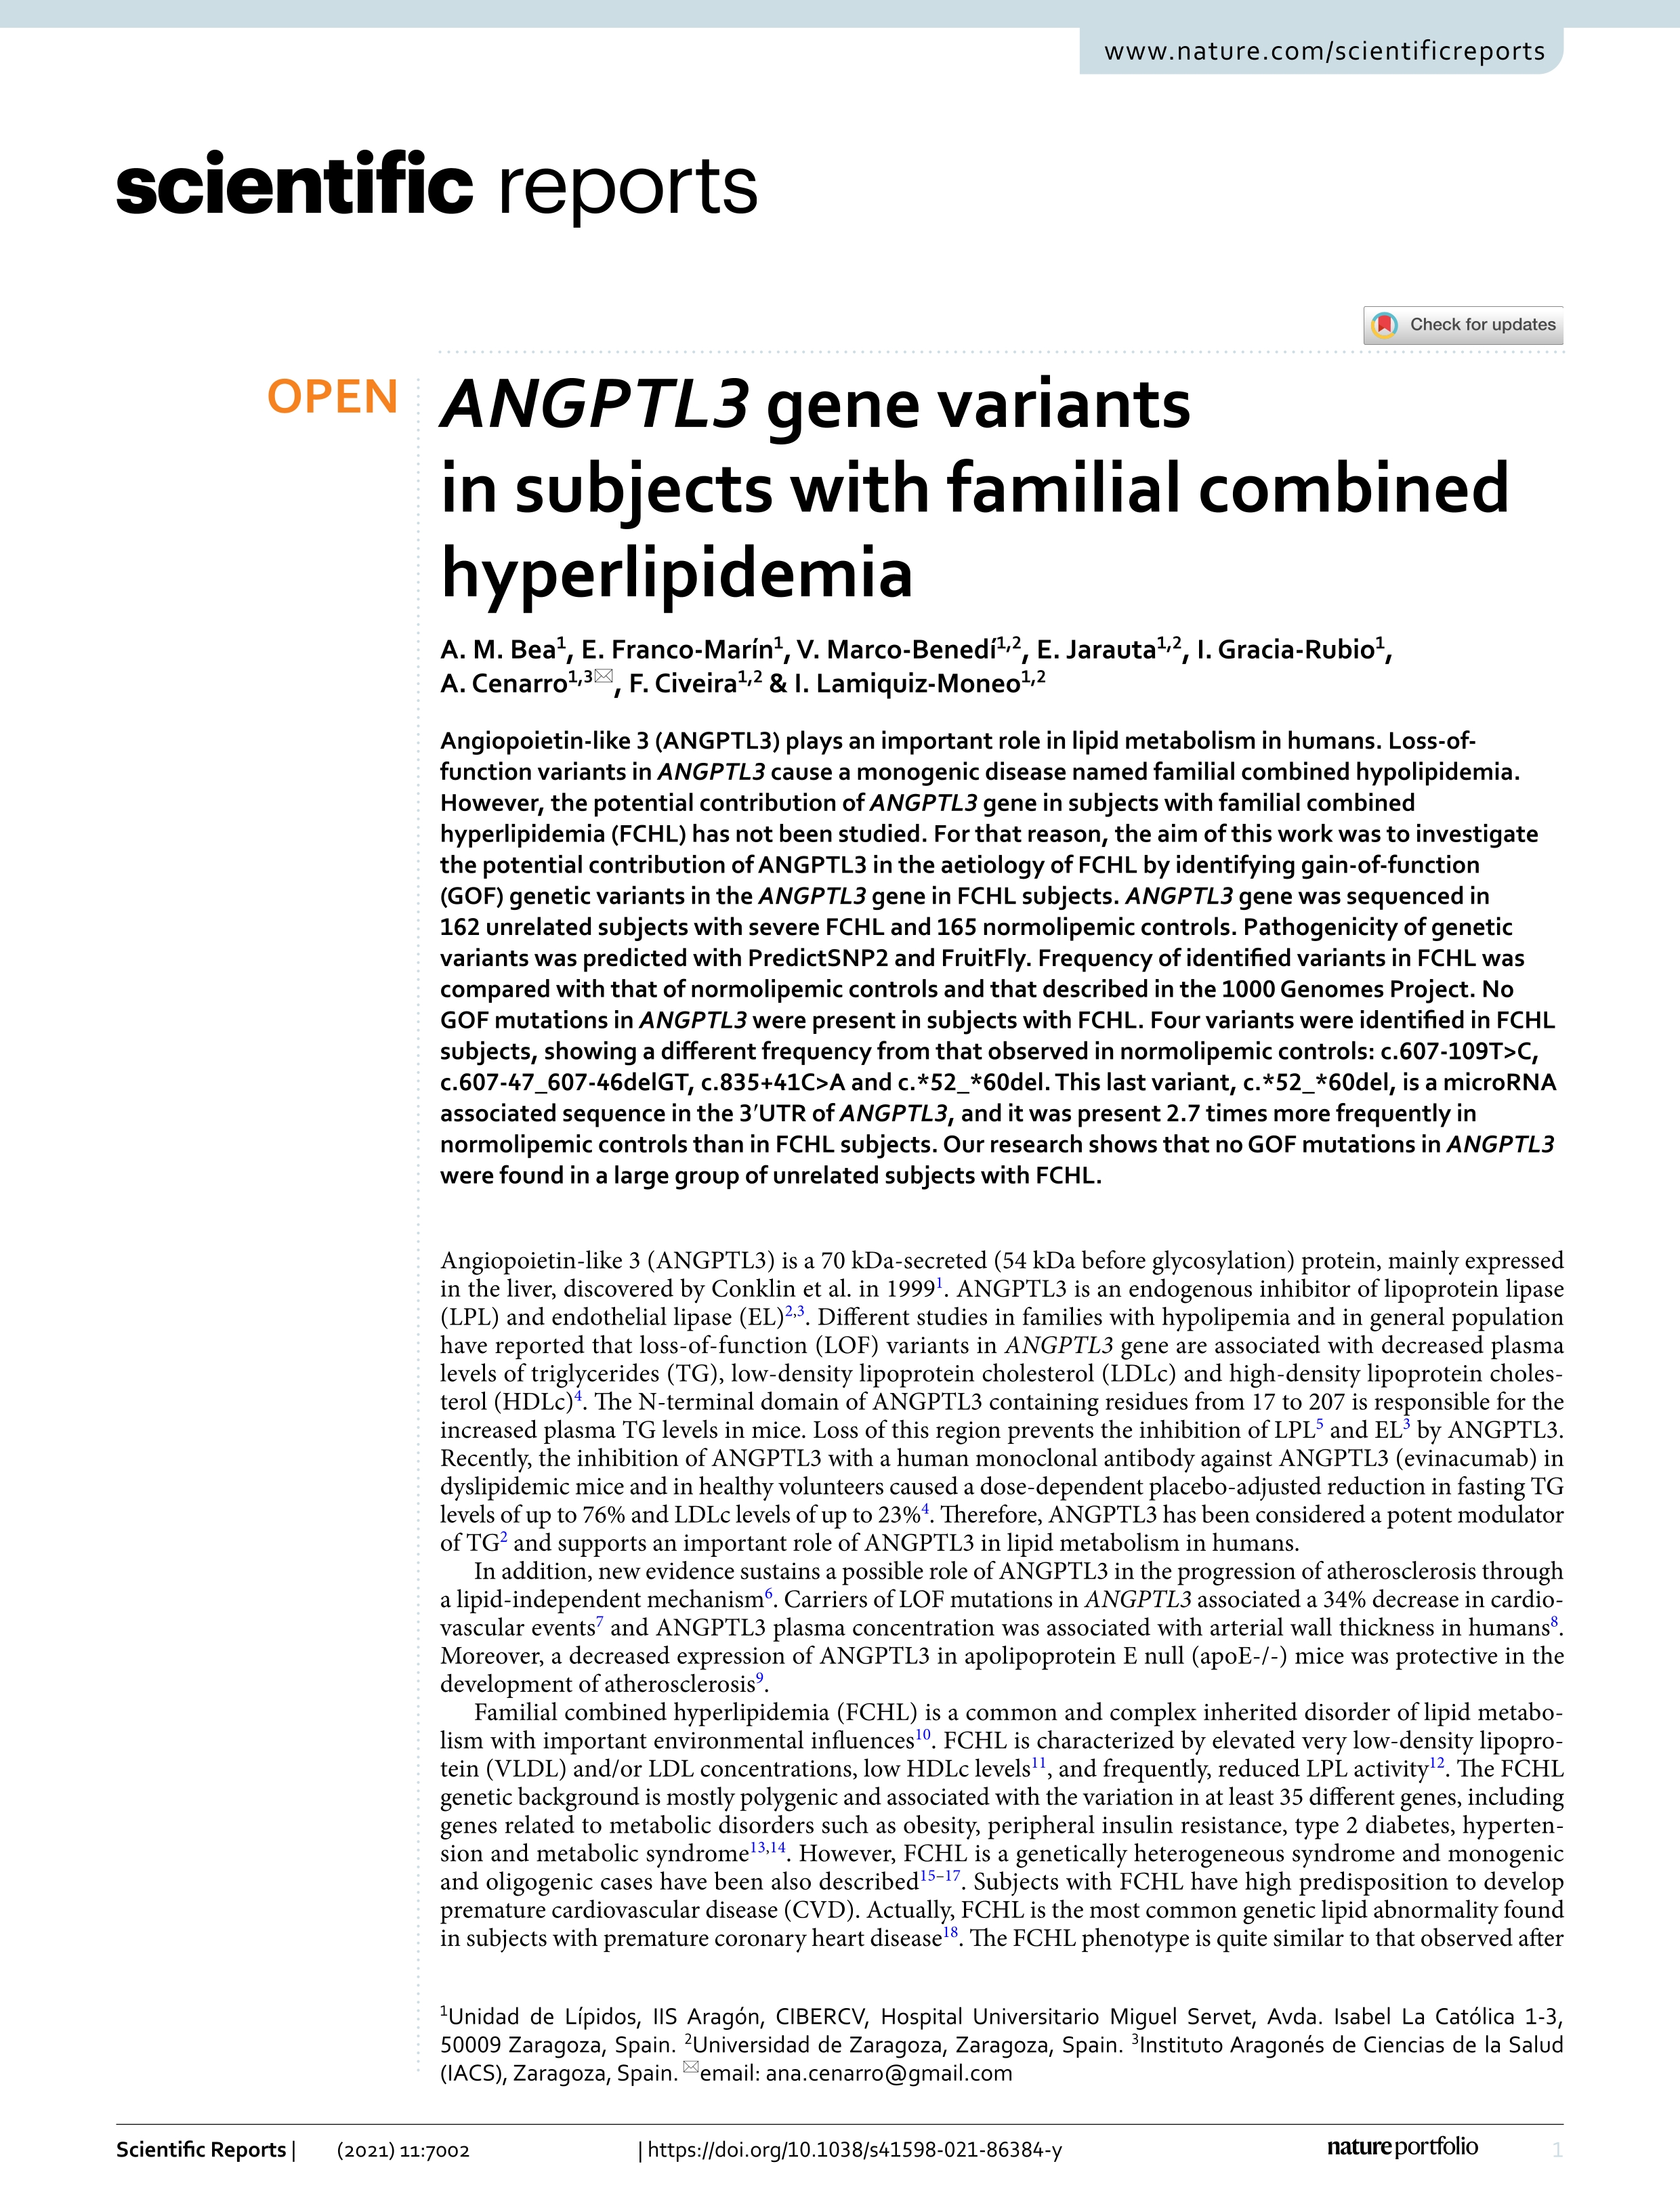 ANGPTL3 gene variants in subjects with familial combined hyperlipidemia